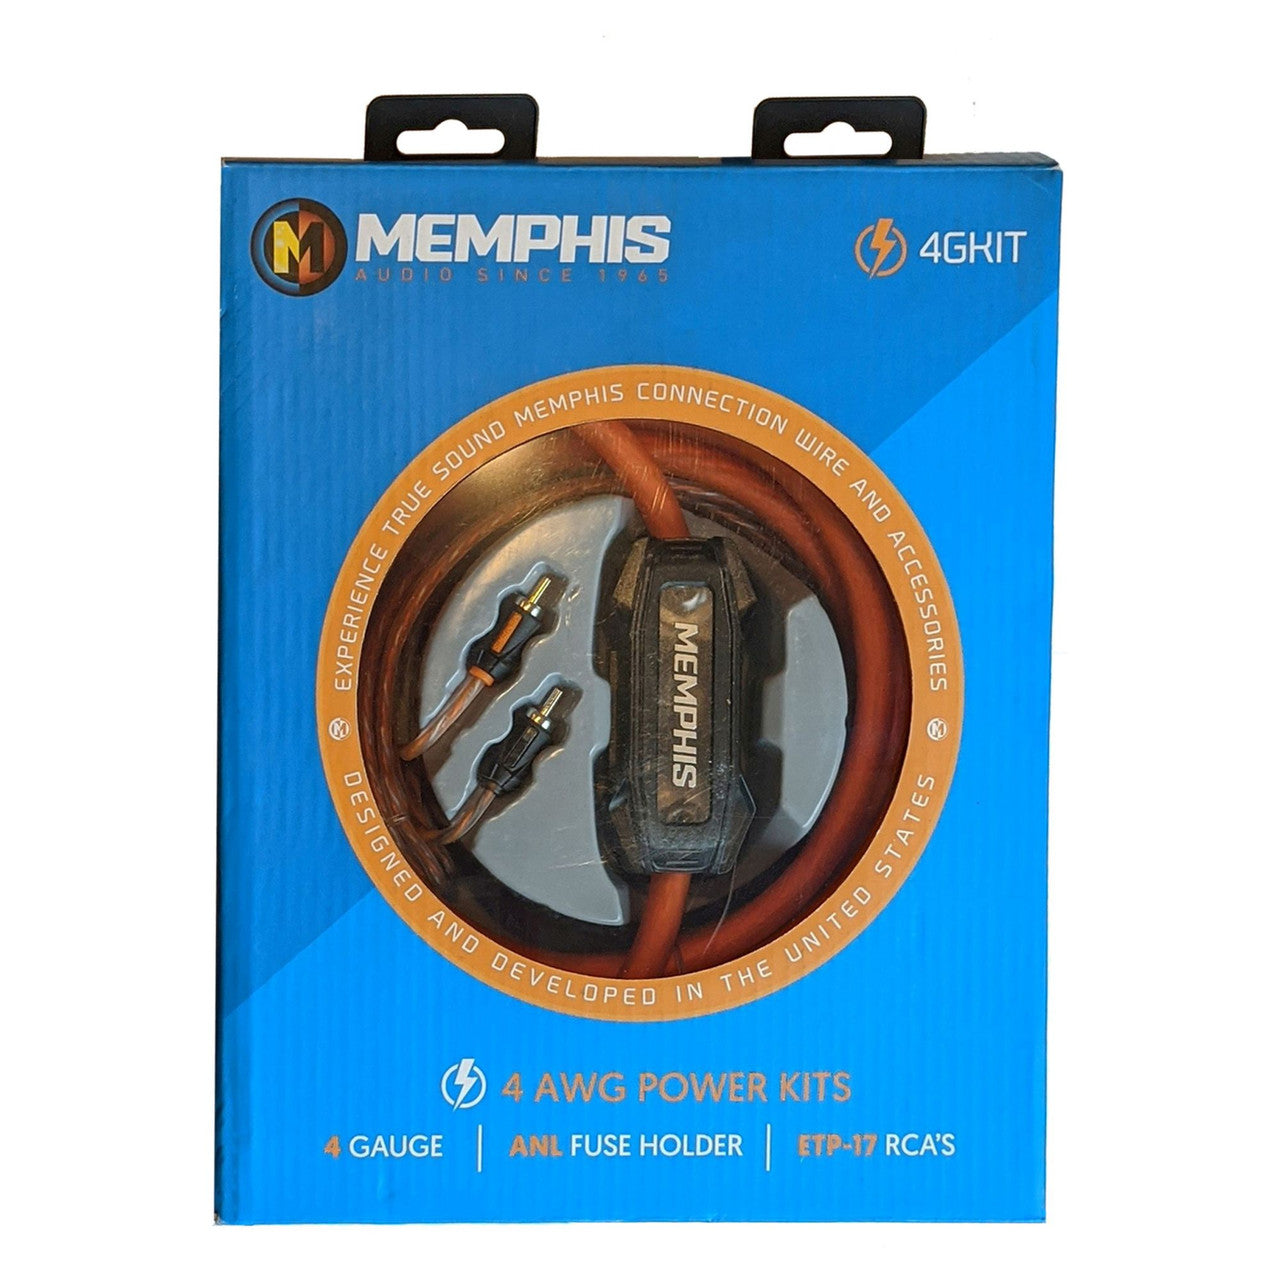 Memphis 4GKIT Memphis Audio 4GKIT 4-Gauge Amp Install Kit With ANL Fuse Holder With One 200A Fuse, And A Pair Of ETP-17 17-Foot RCAs